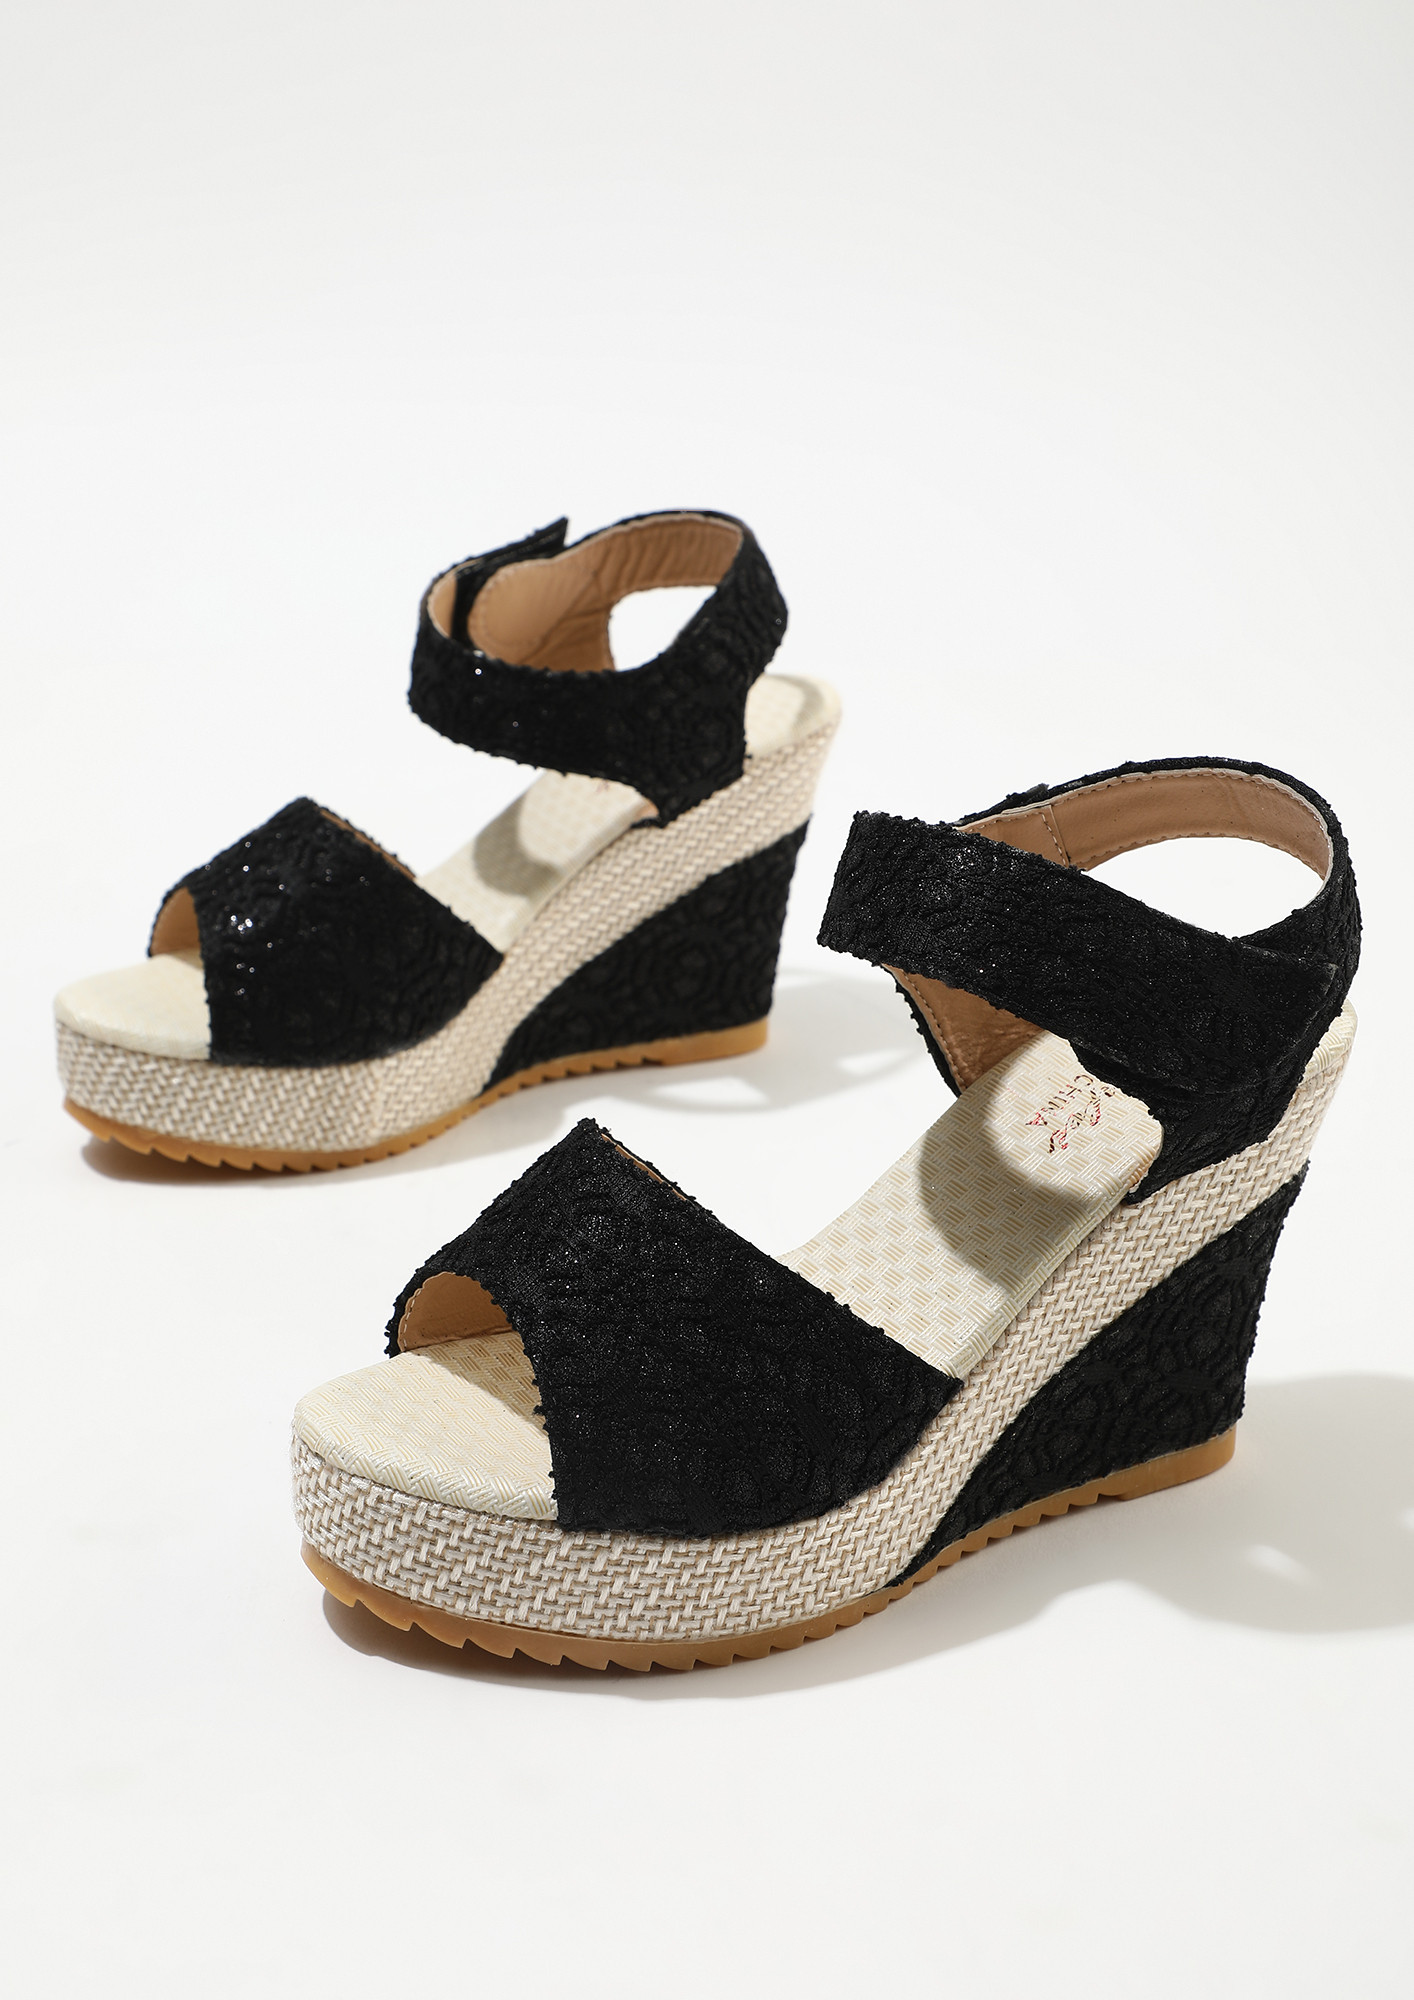 Route One Apparel - Maryland Flag / Cork Wedge Heels